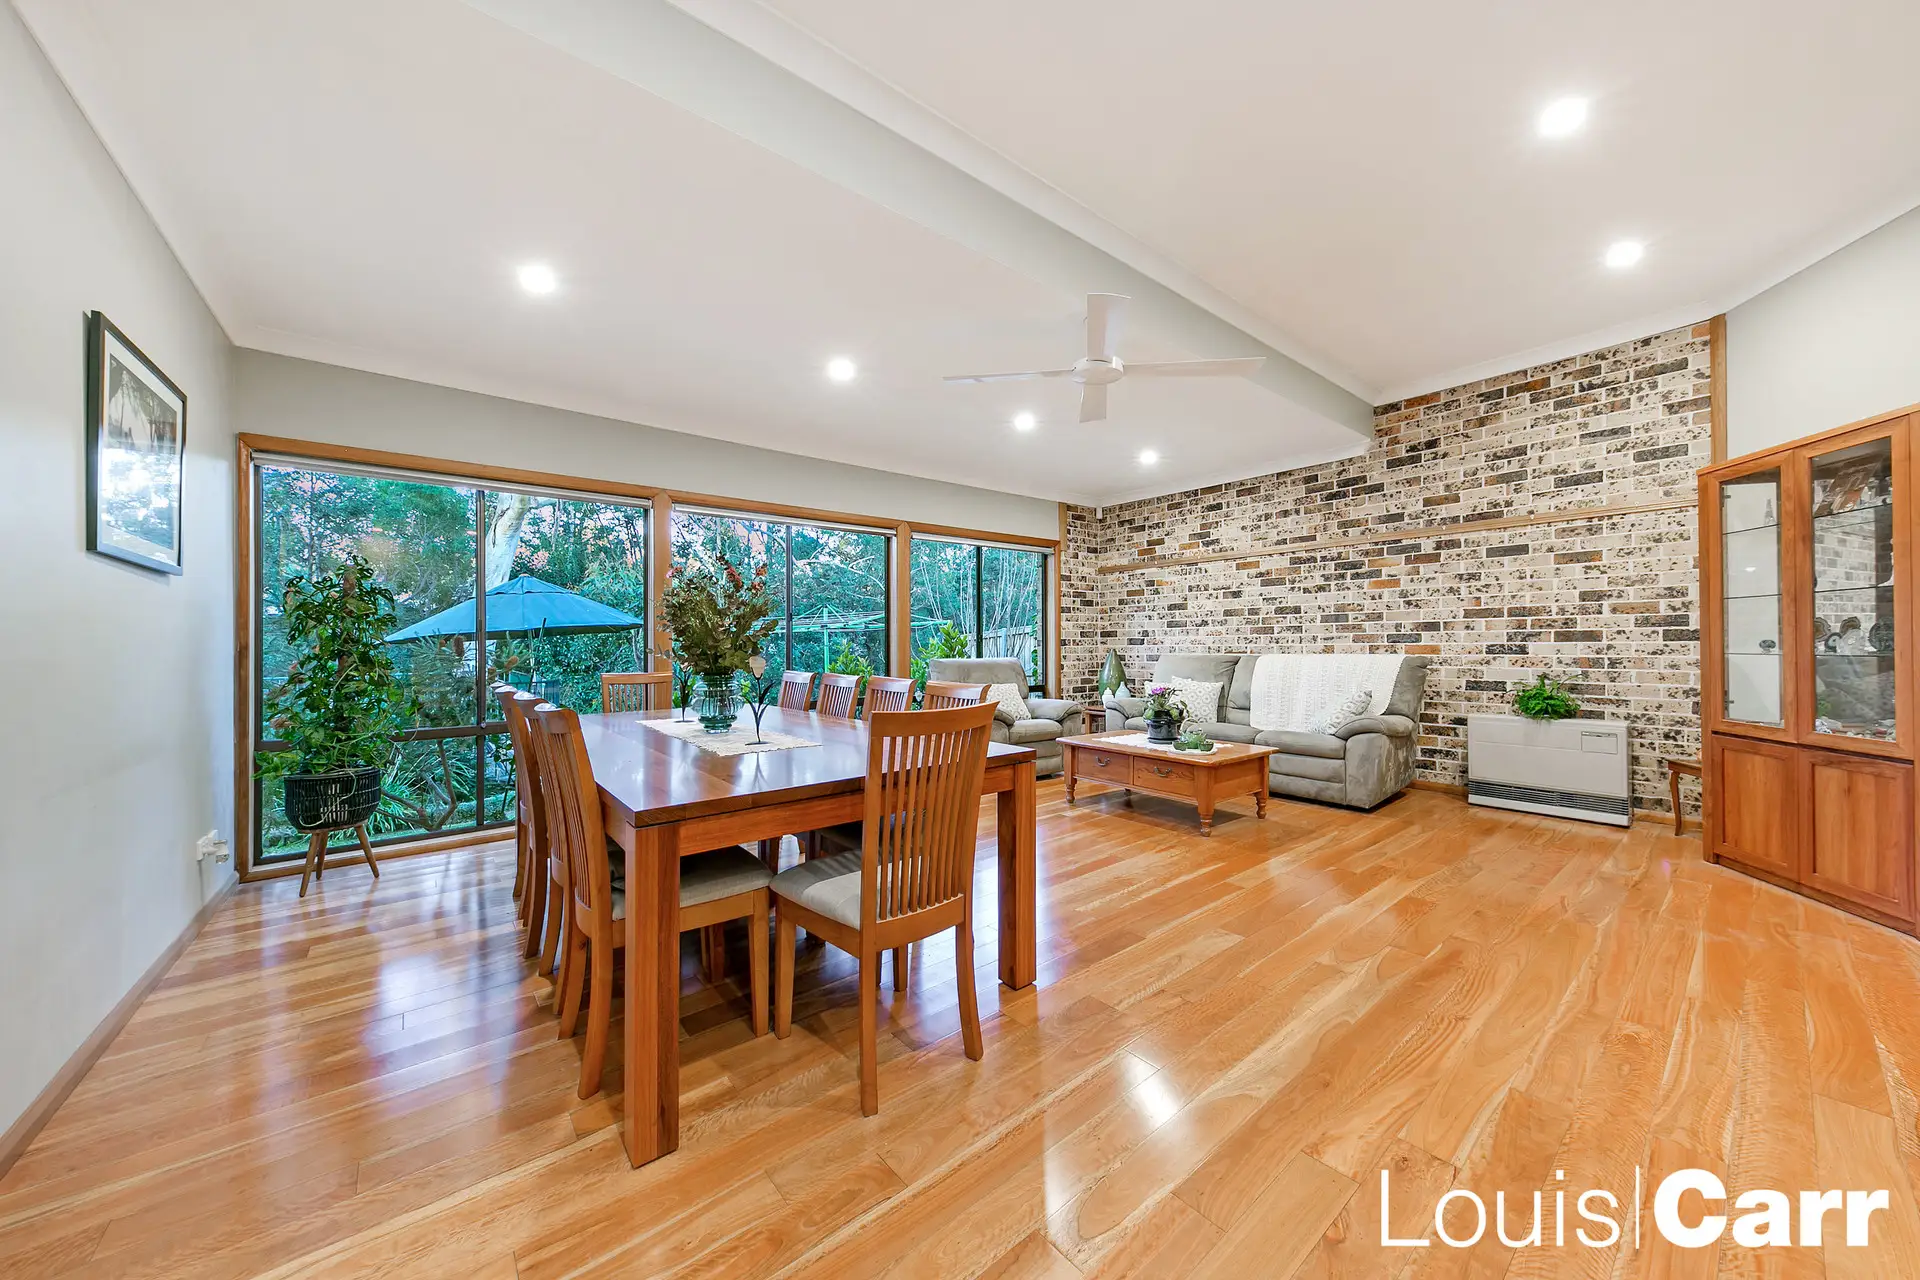 Photo #2: 13 Cairngorm Avenue, Glenhaven - Sold by Louis Carr Real Estate